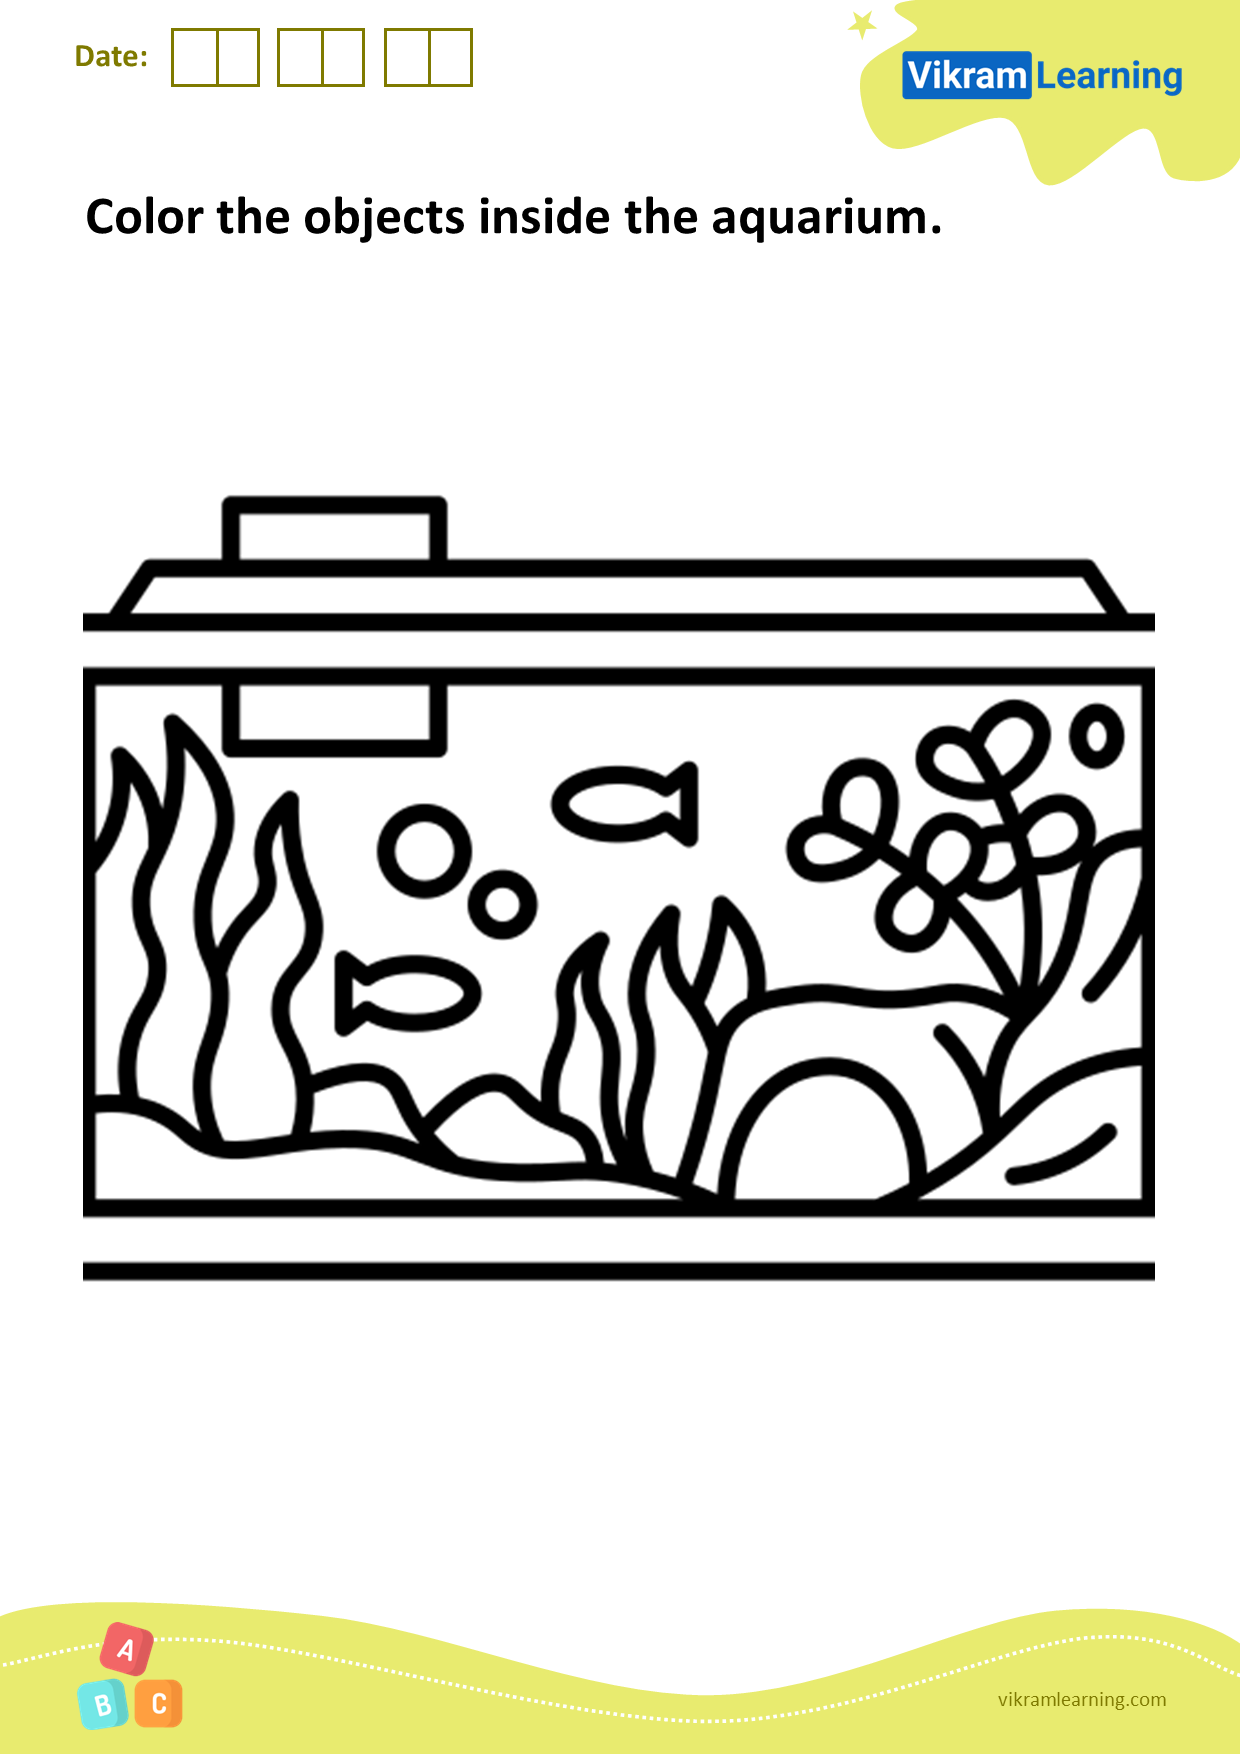 Download color the objects inside the aquarium worksheets